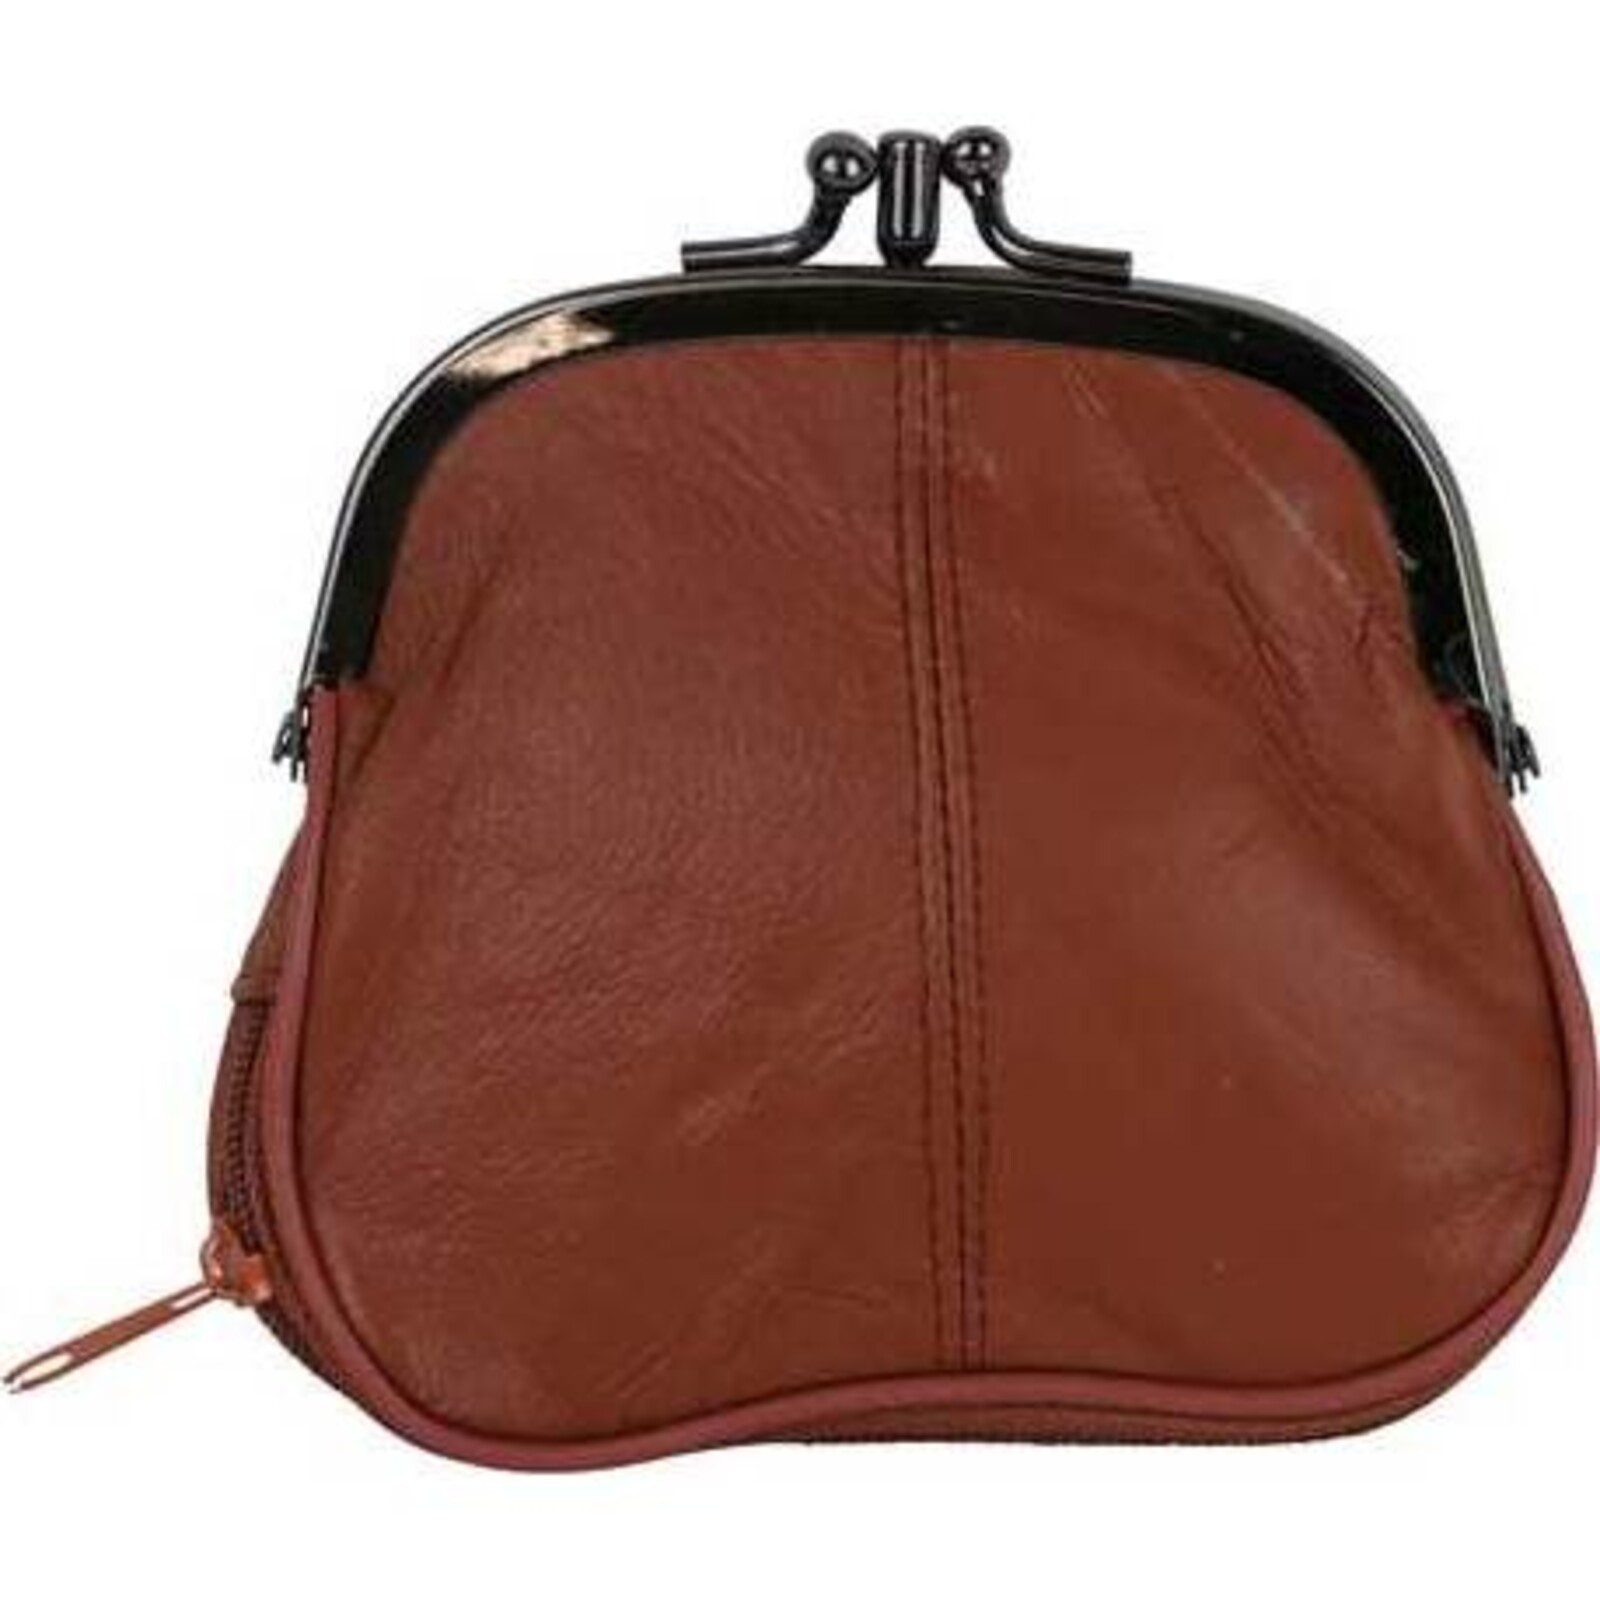 Leather Purse Double Chocolate